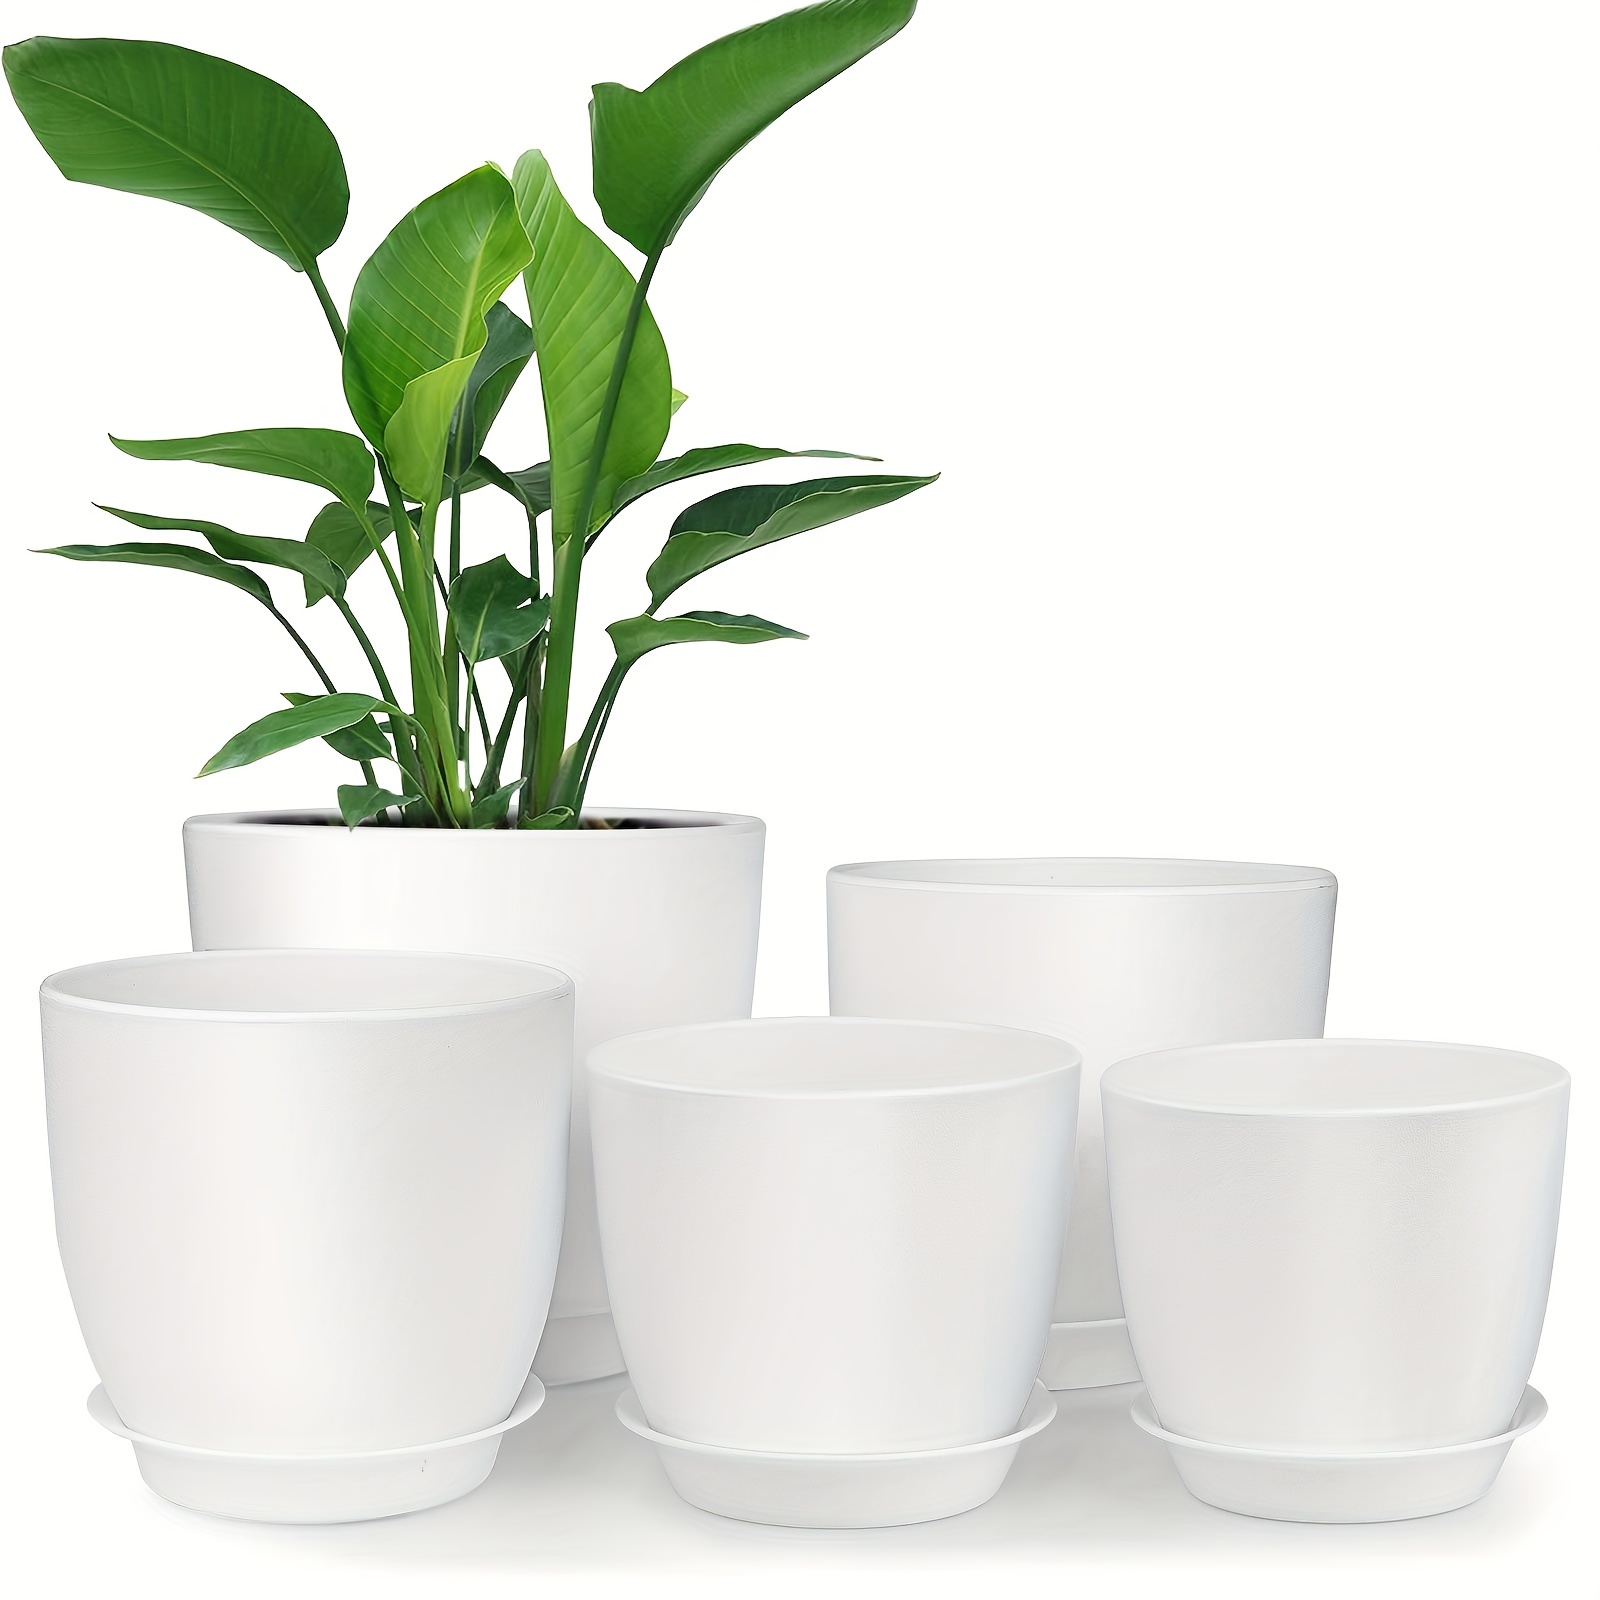 

5pcs, Plastic Planter, 7/6/5.5/4.8/4.5 Inch Flower Pot Indoor Modern Decorative Plastic Pots For Plants With Drainage Hole And Tray For All House Plants, Succulents, Flowers, And Cactus, White